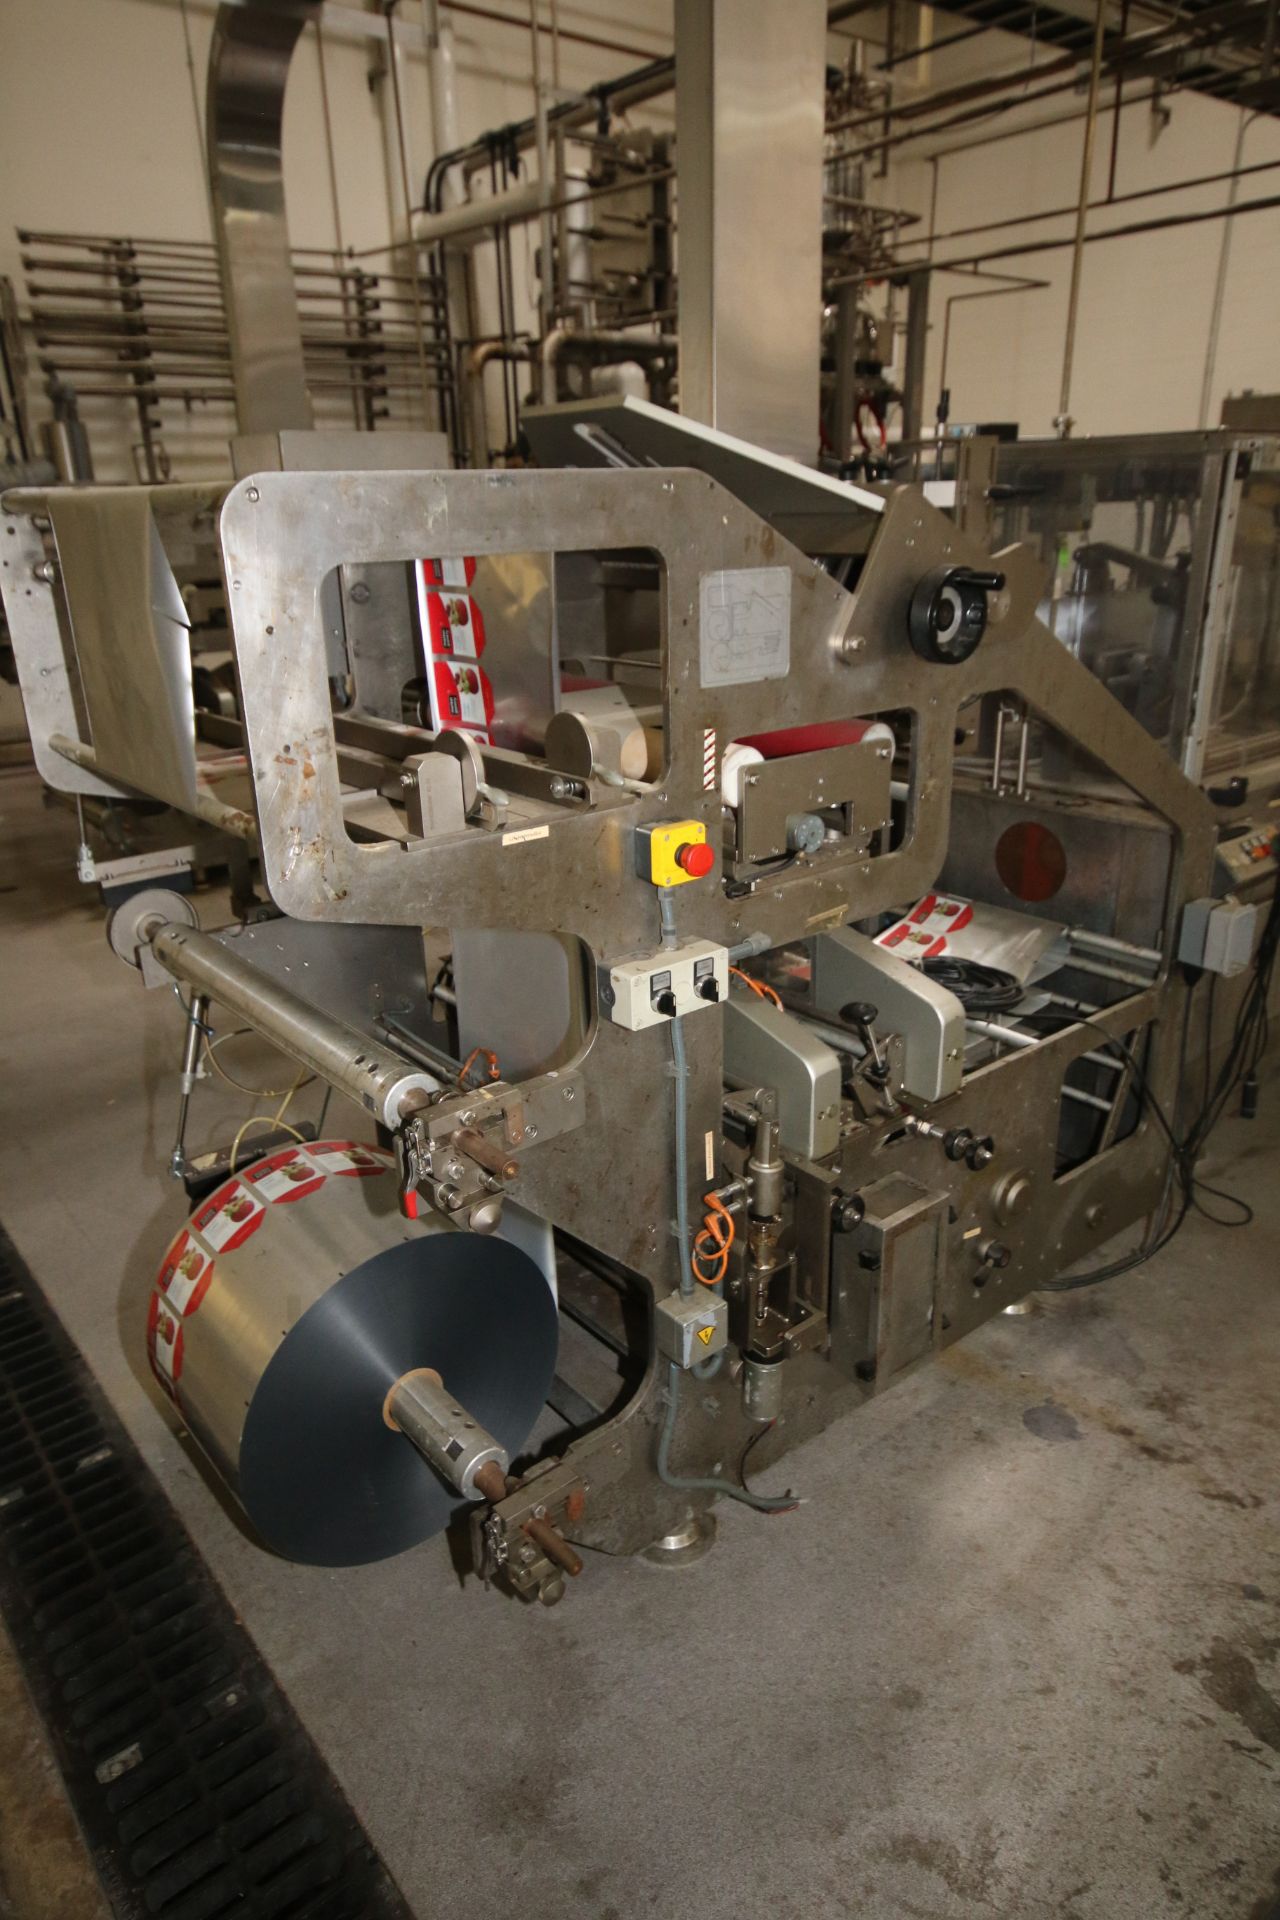 Volpak Pouch Filler, M/N S-240-DF, Fecha 14-04-00, N Fab 1018-2-A, with S/S Infeed Vessel/Funnel and - Image 8 of 12